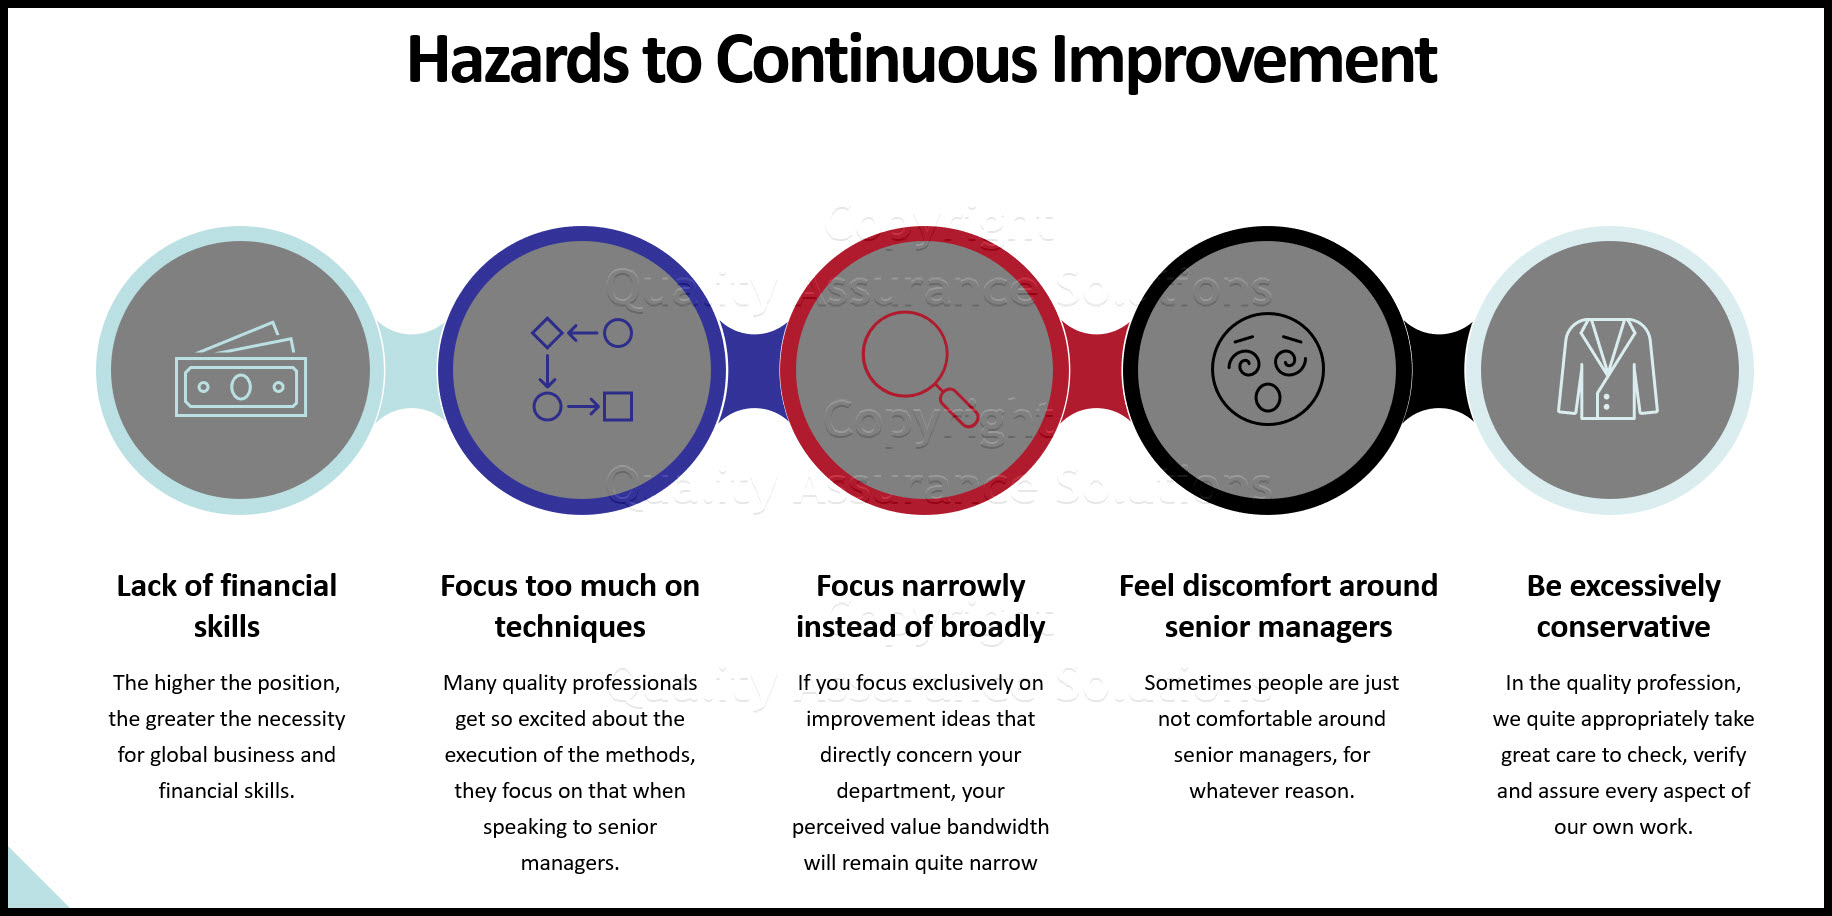 Learn the hazards to implementing continuous quality improvement. 